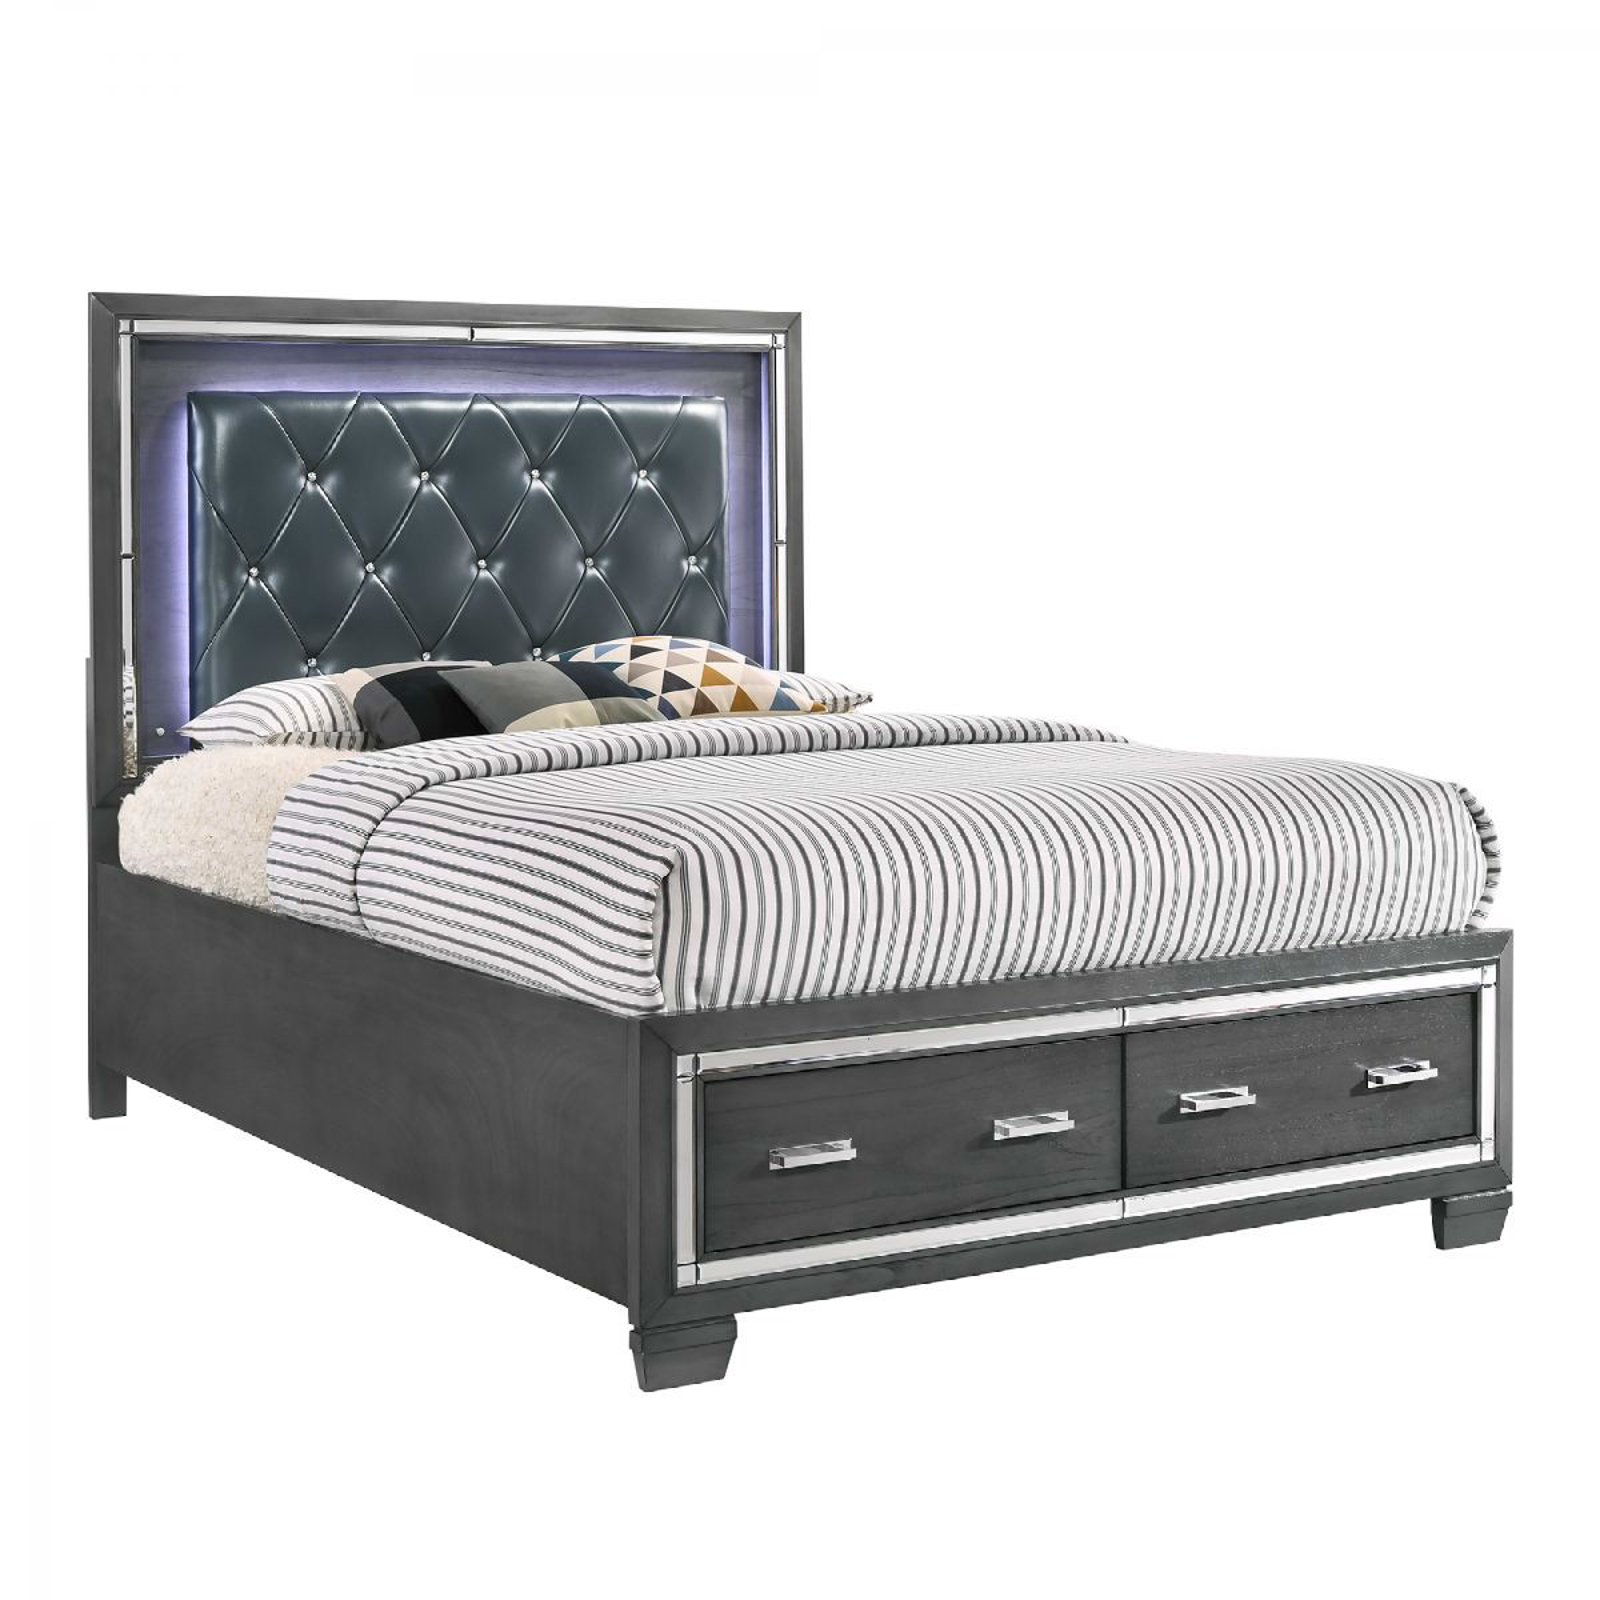 Picture of Titanium King Size Bed